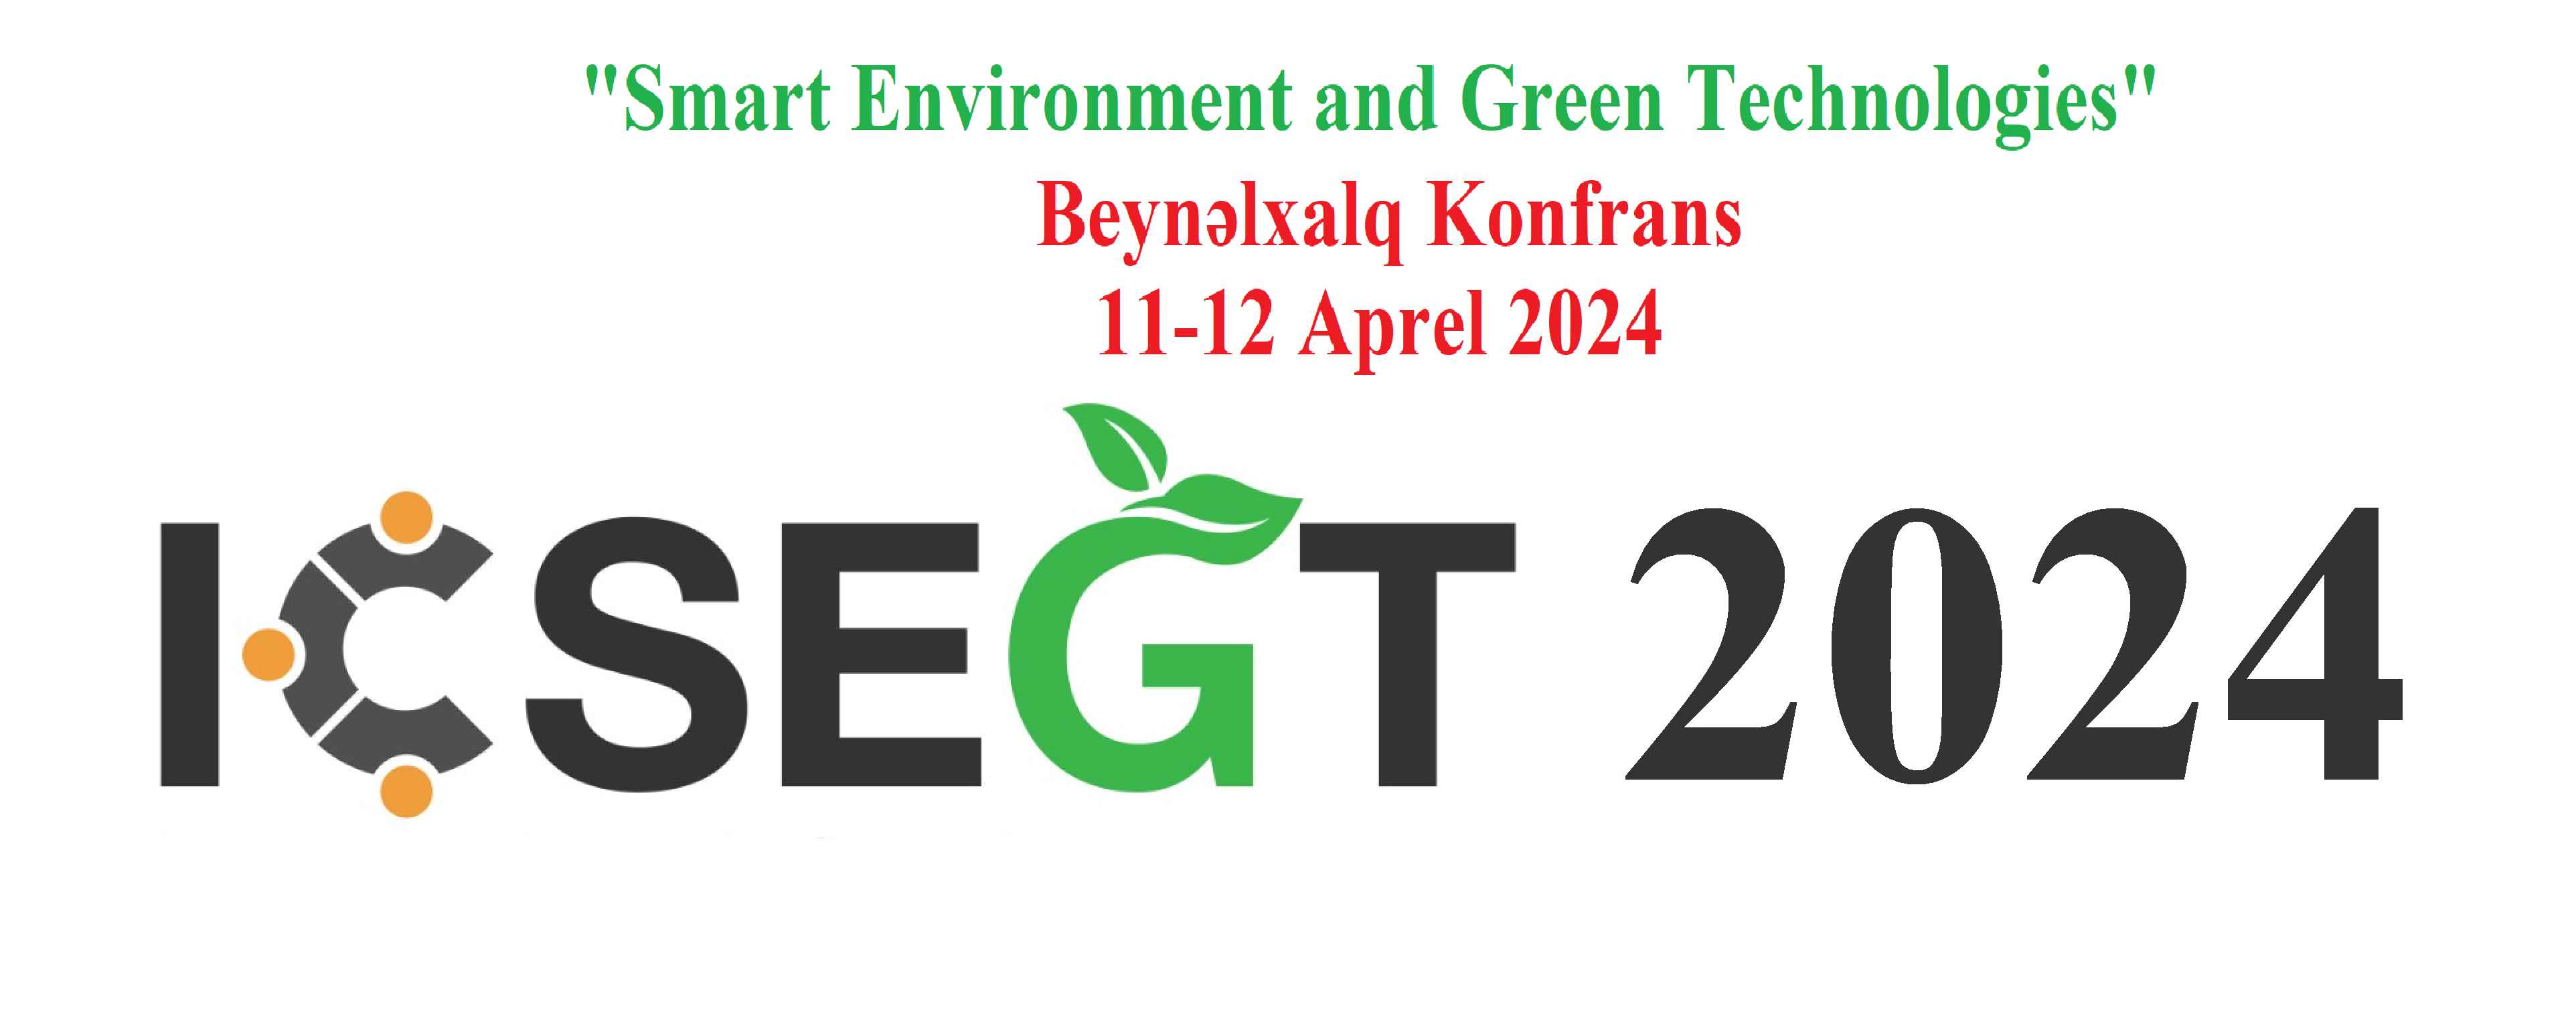 An international conference called "Smart Environment and Green Technologies" will be held at OYU